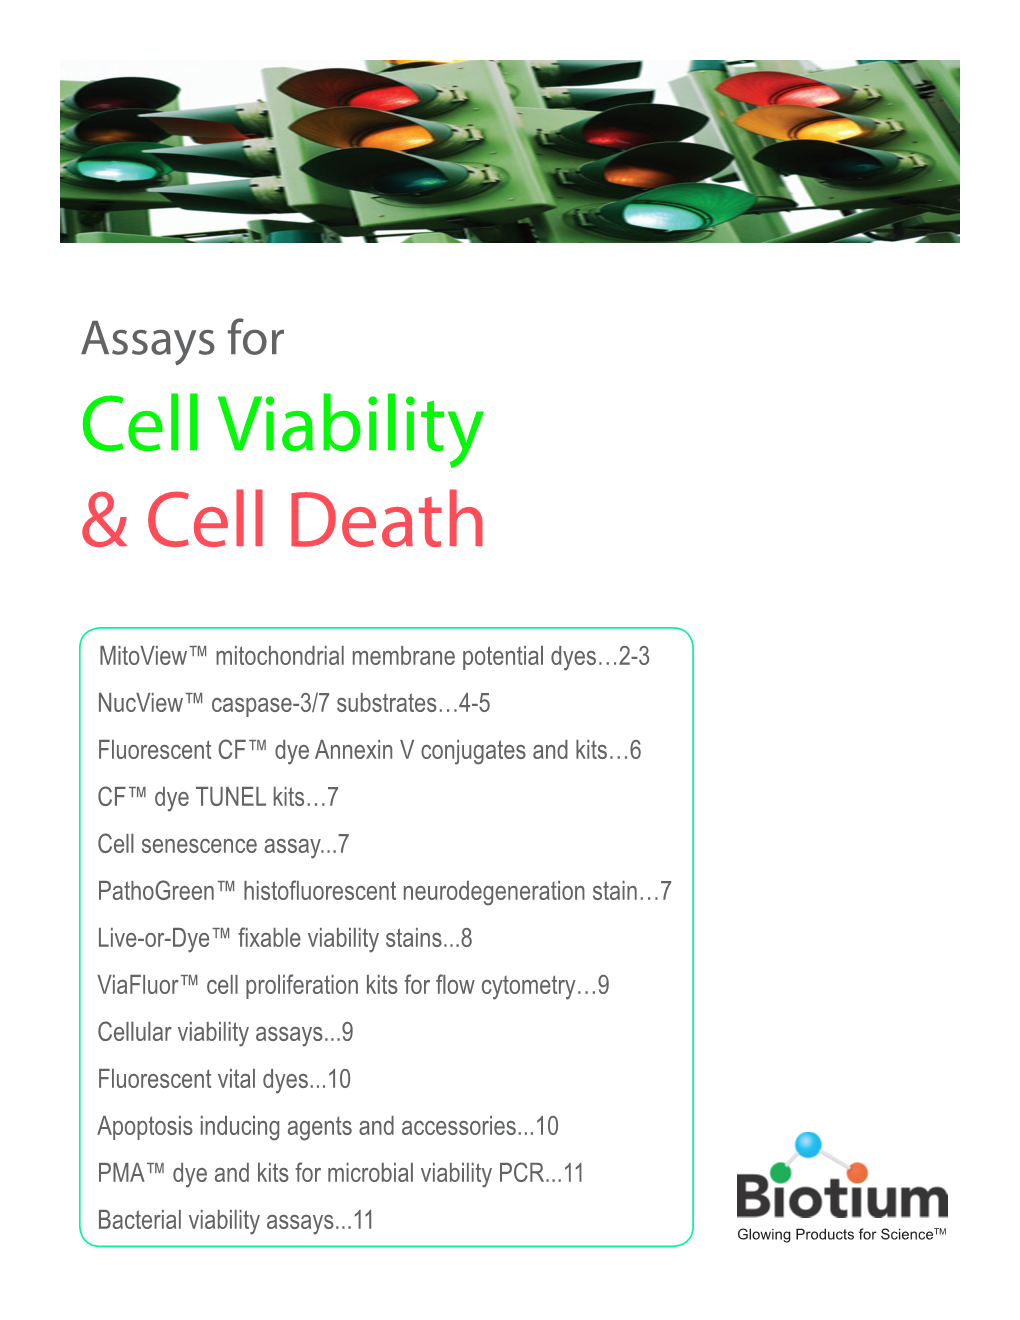 Assays for Cell Viability & Cell Death